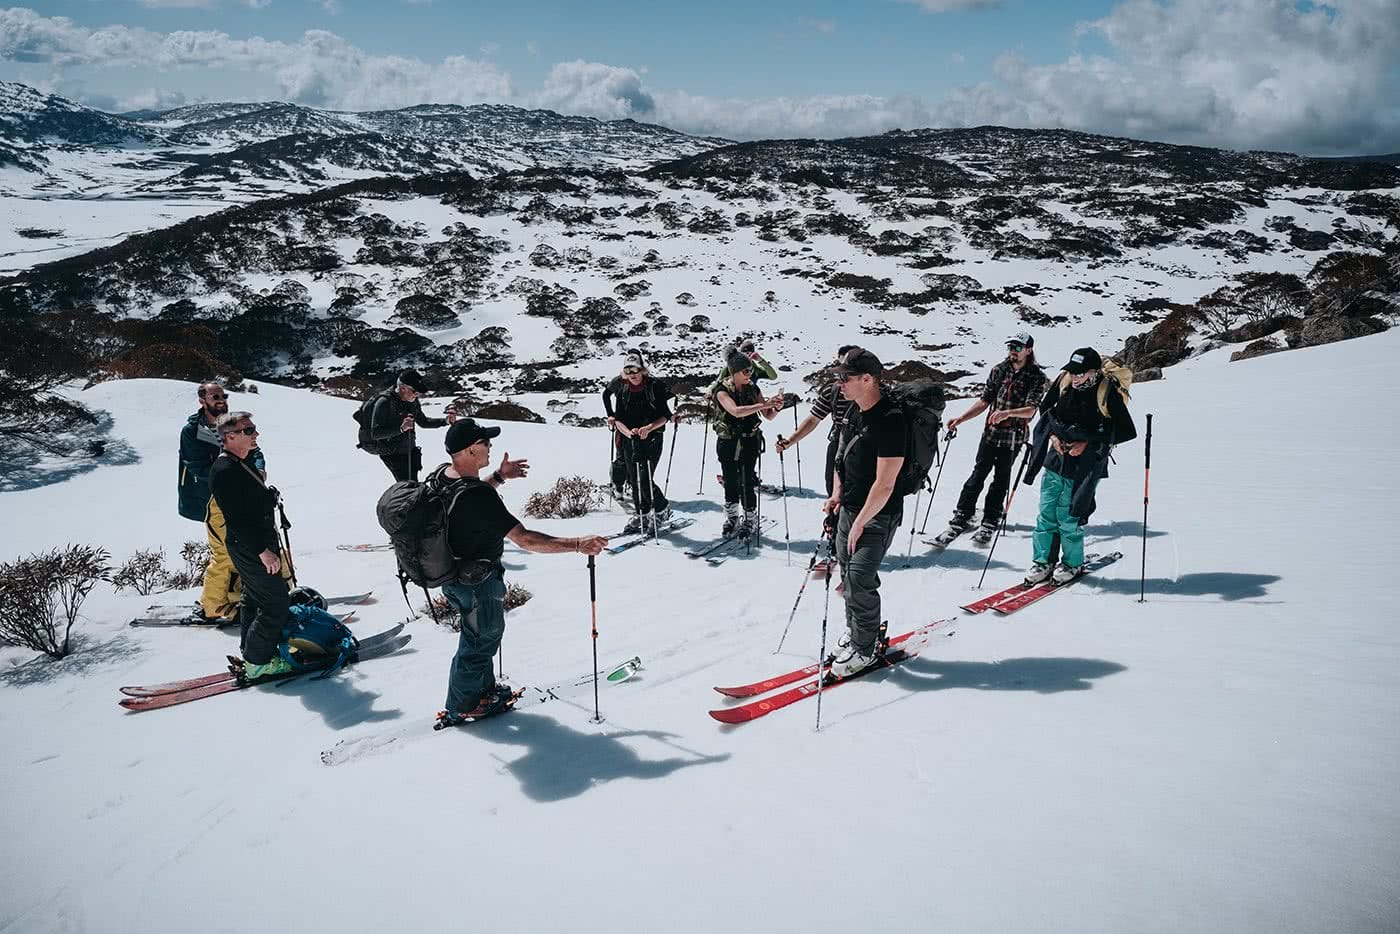 Wait, Australia Has Backcountry Skiing? Is It Any Good? Photo by Ain Raadick or Ben Savage, Arc'teryx event, snow, skiers, group, instruction